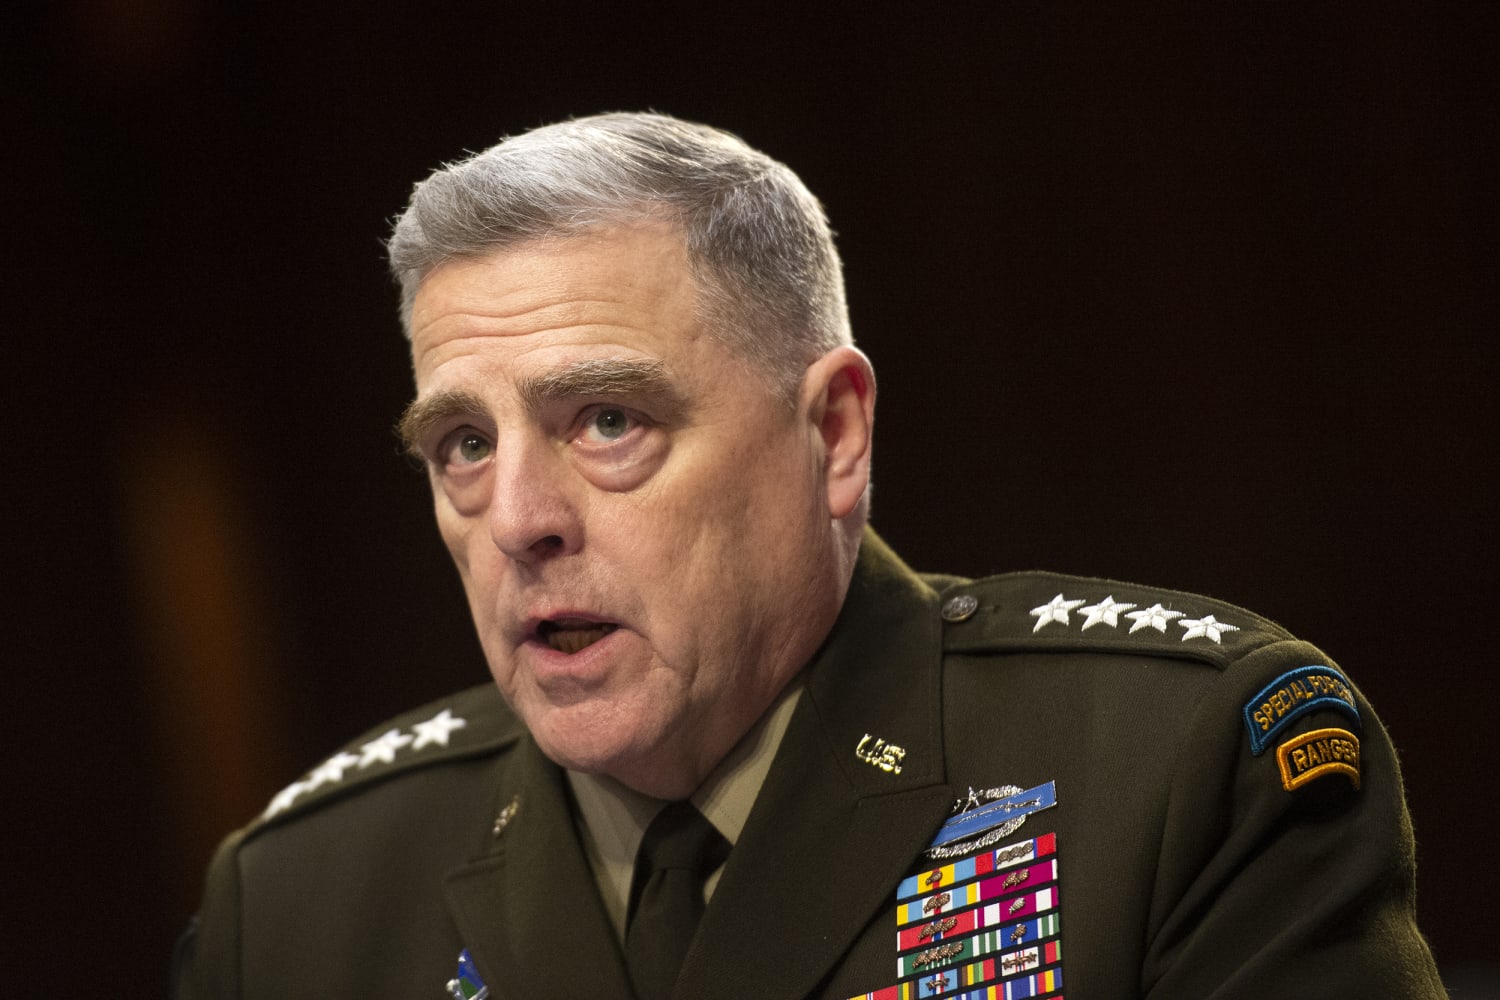 Chairman of Joint Chiefs says no role for military in presidential election